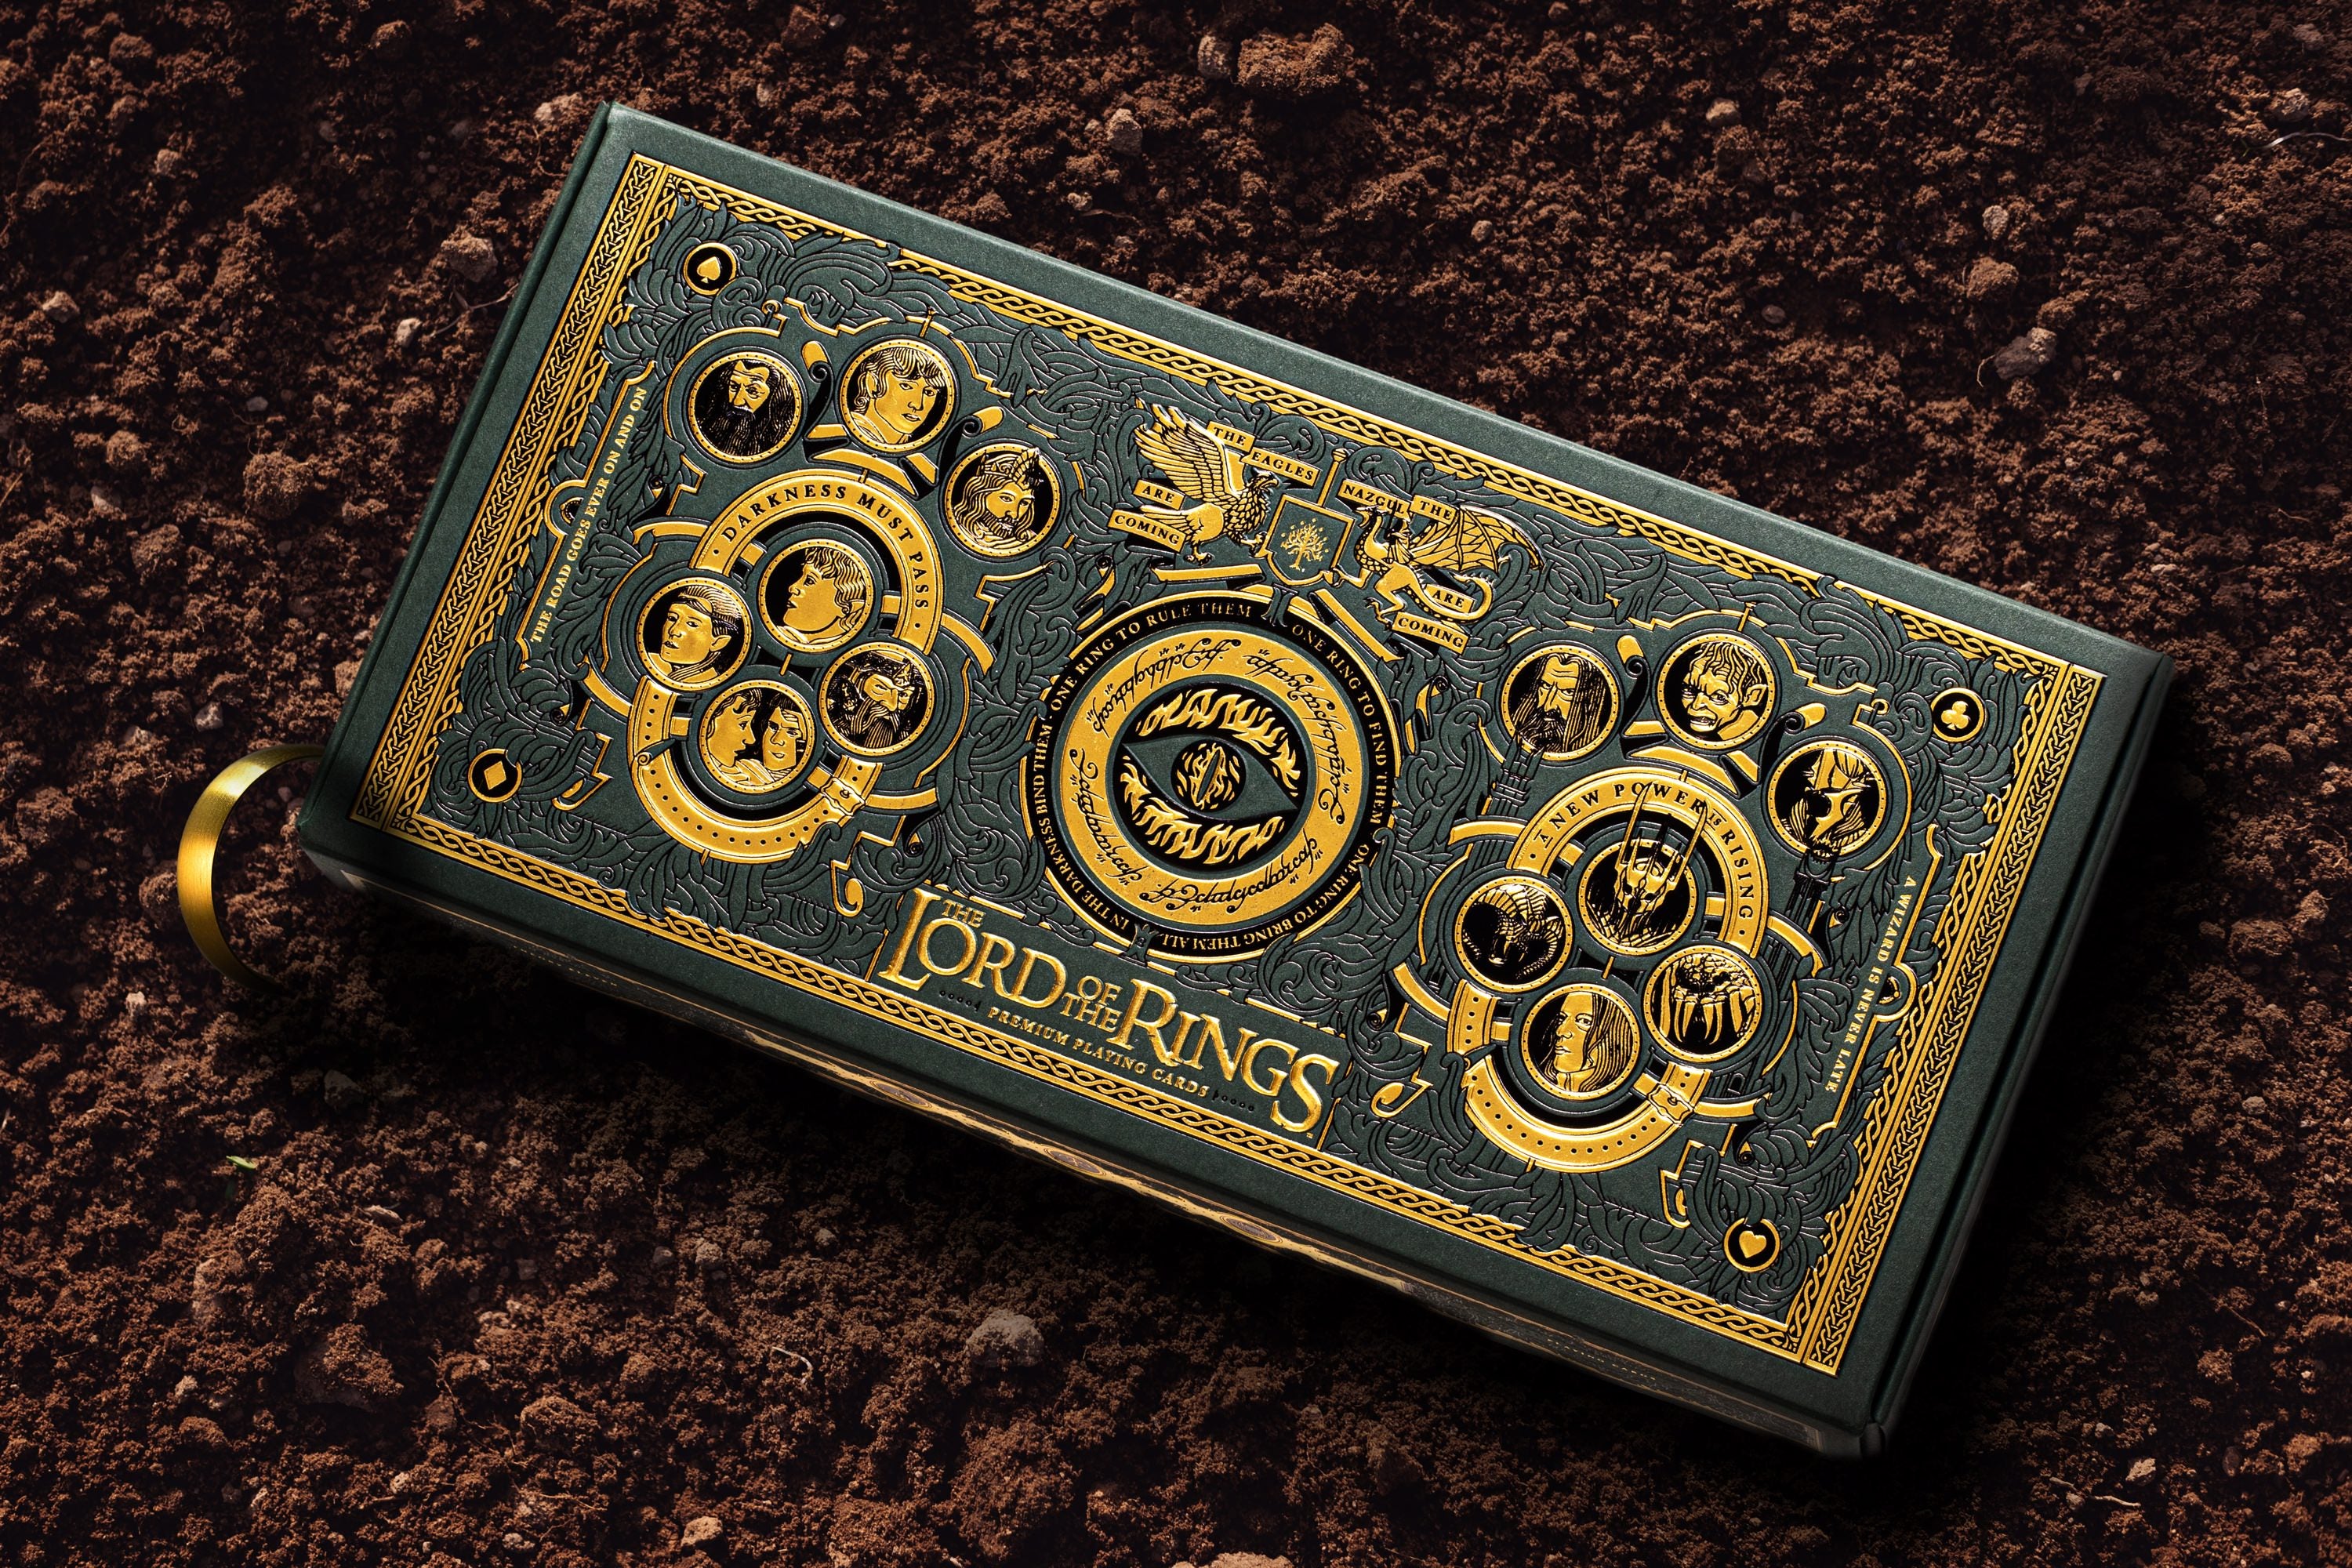 The Lord of the Rings Playing Cards